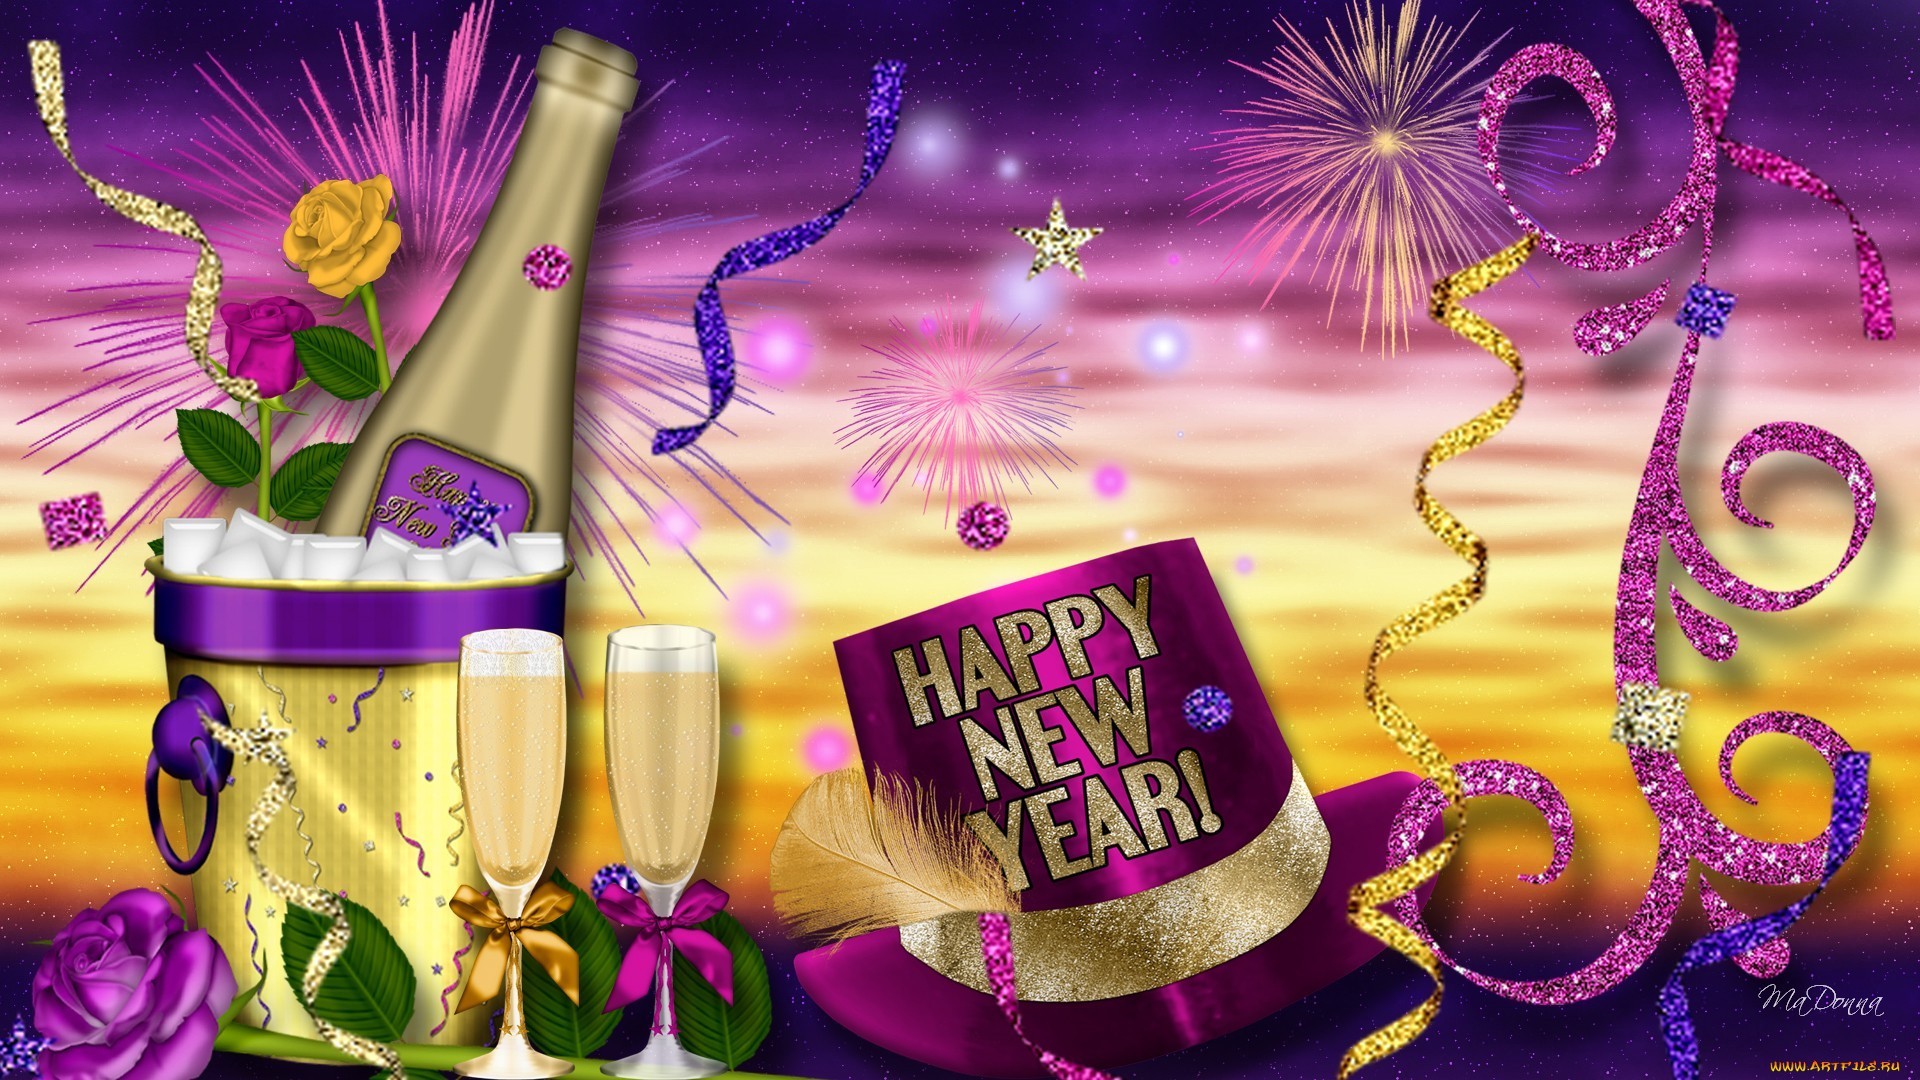 UHD wallpaper holidays, background, new year